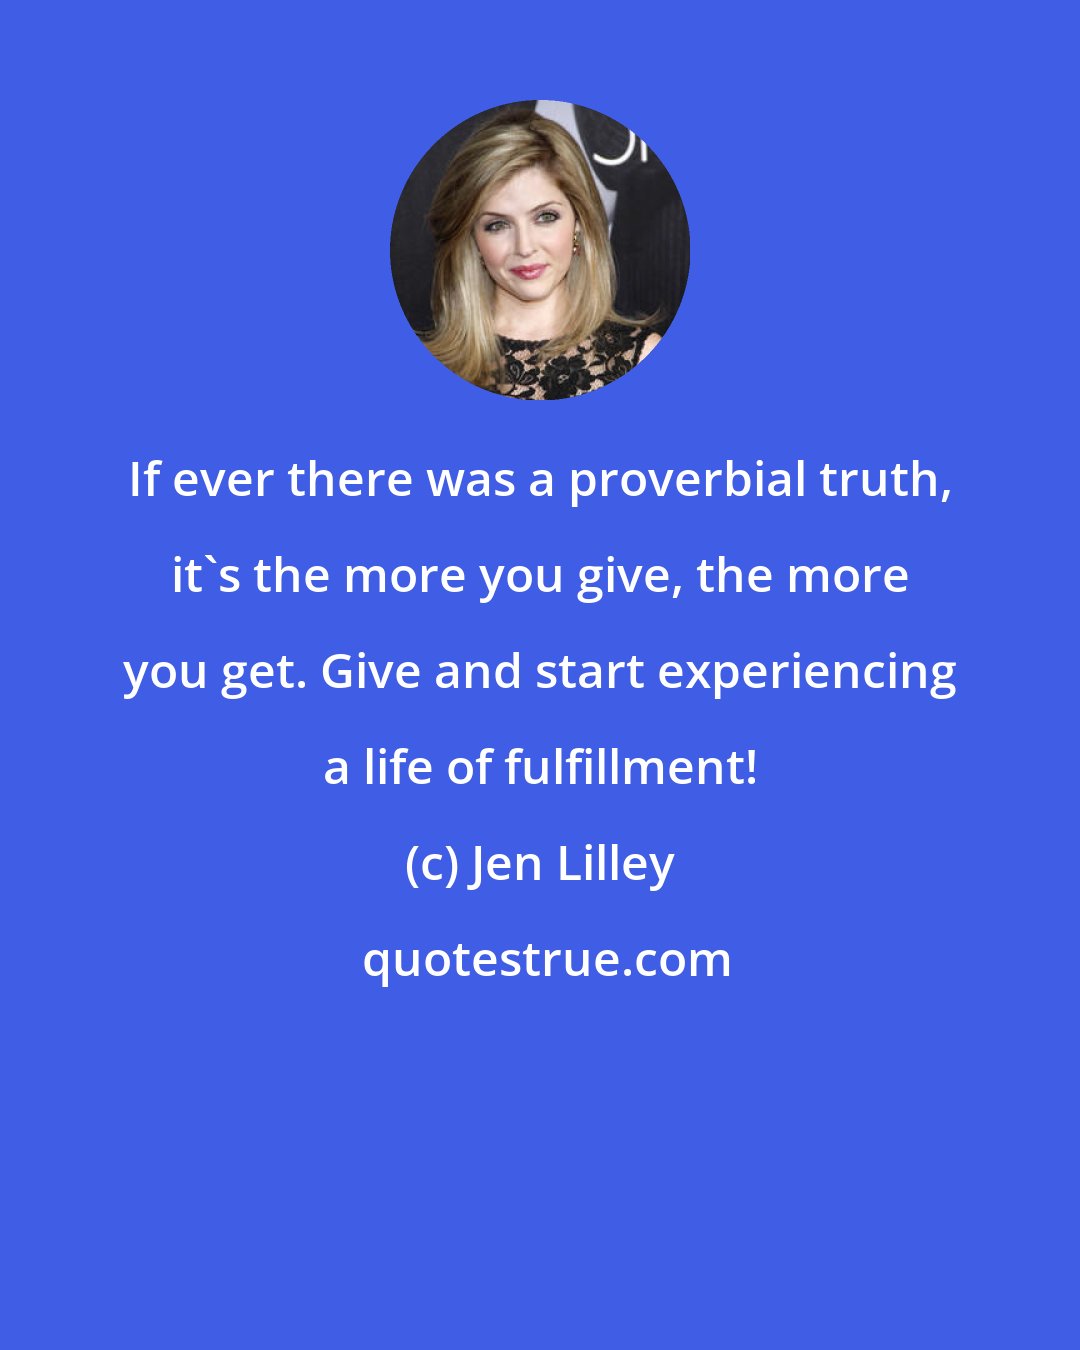 Jen Lilley: If ever there was a proverbial truth, it's the more you give, the more you get. Give and start experiencing a life of fulfillment!